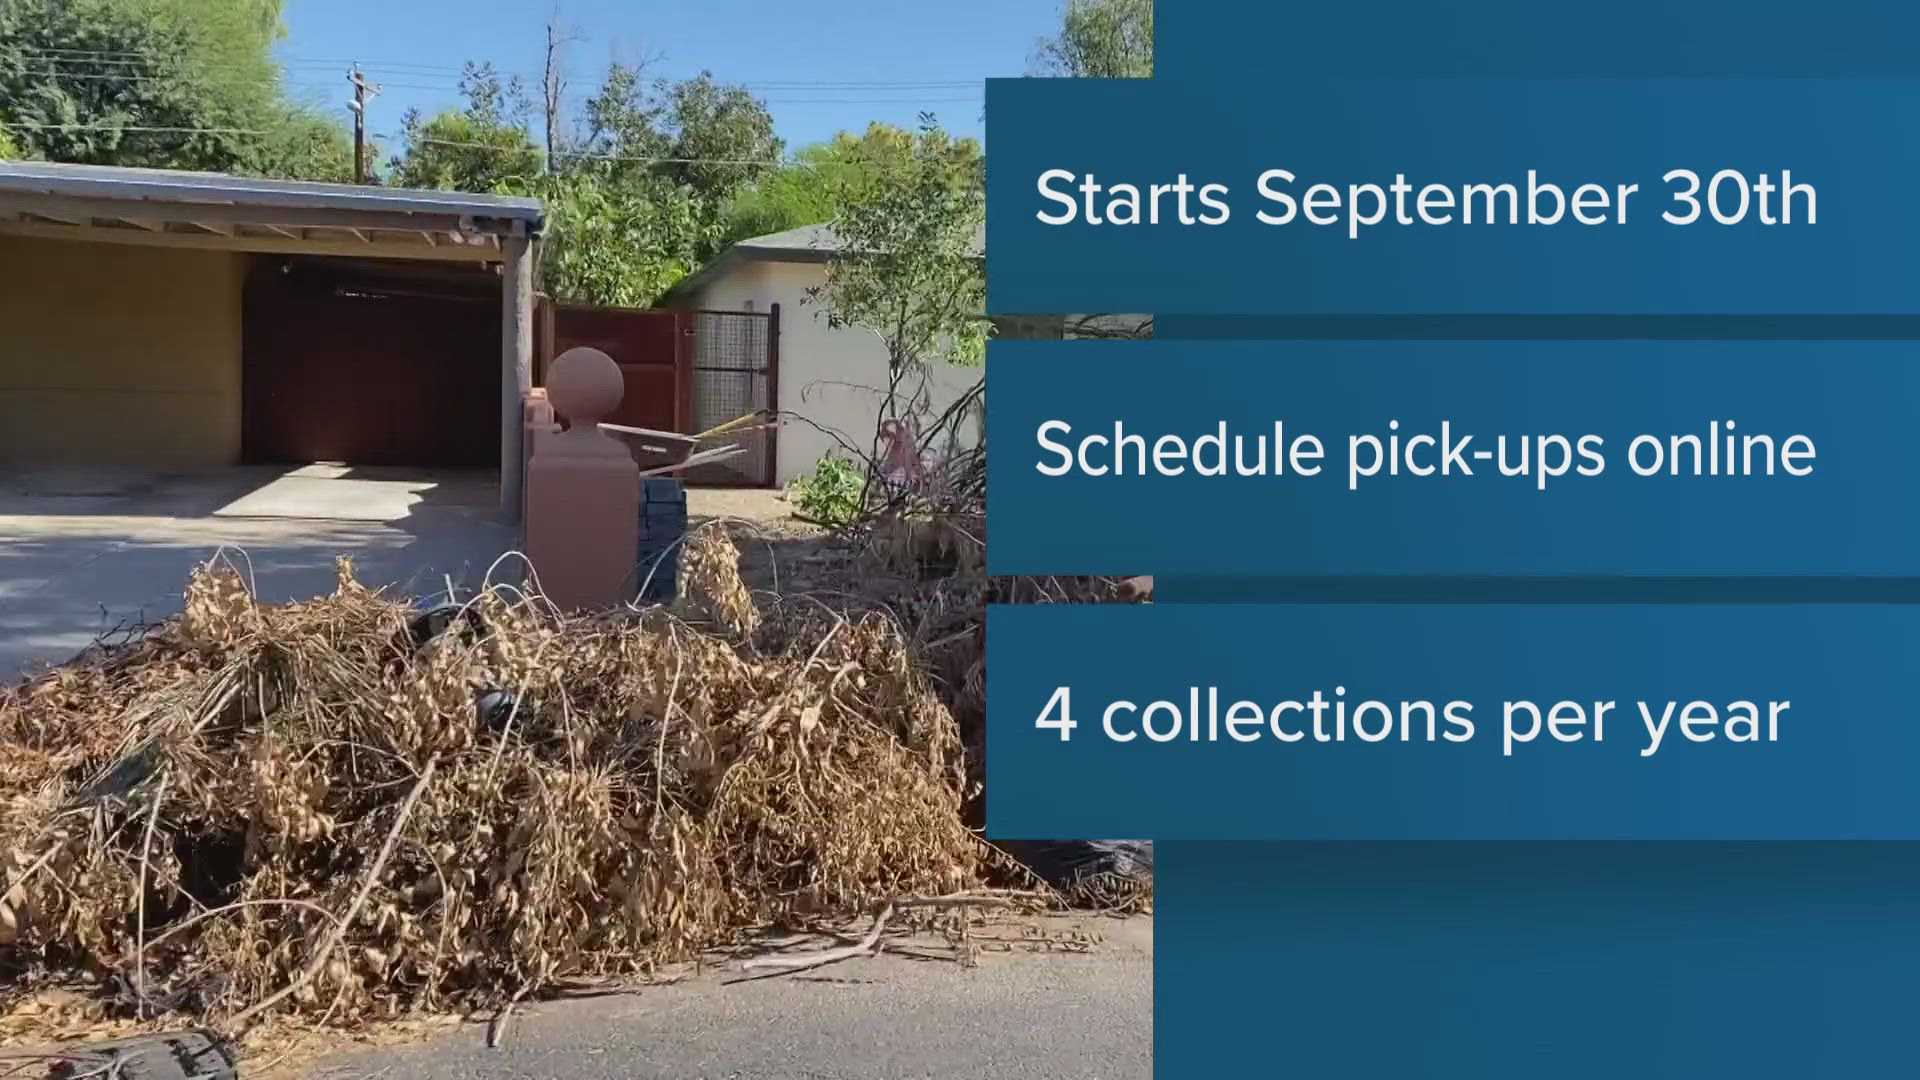 The City of Phoenix is switching to appointment-based bulk trash collection beginning Sept. 30. Here are the details.